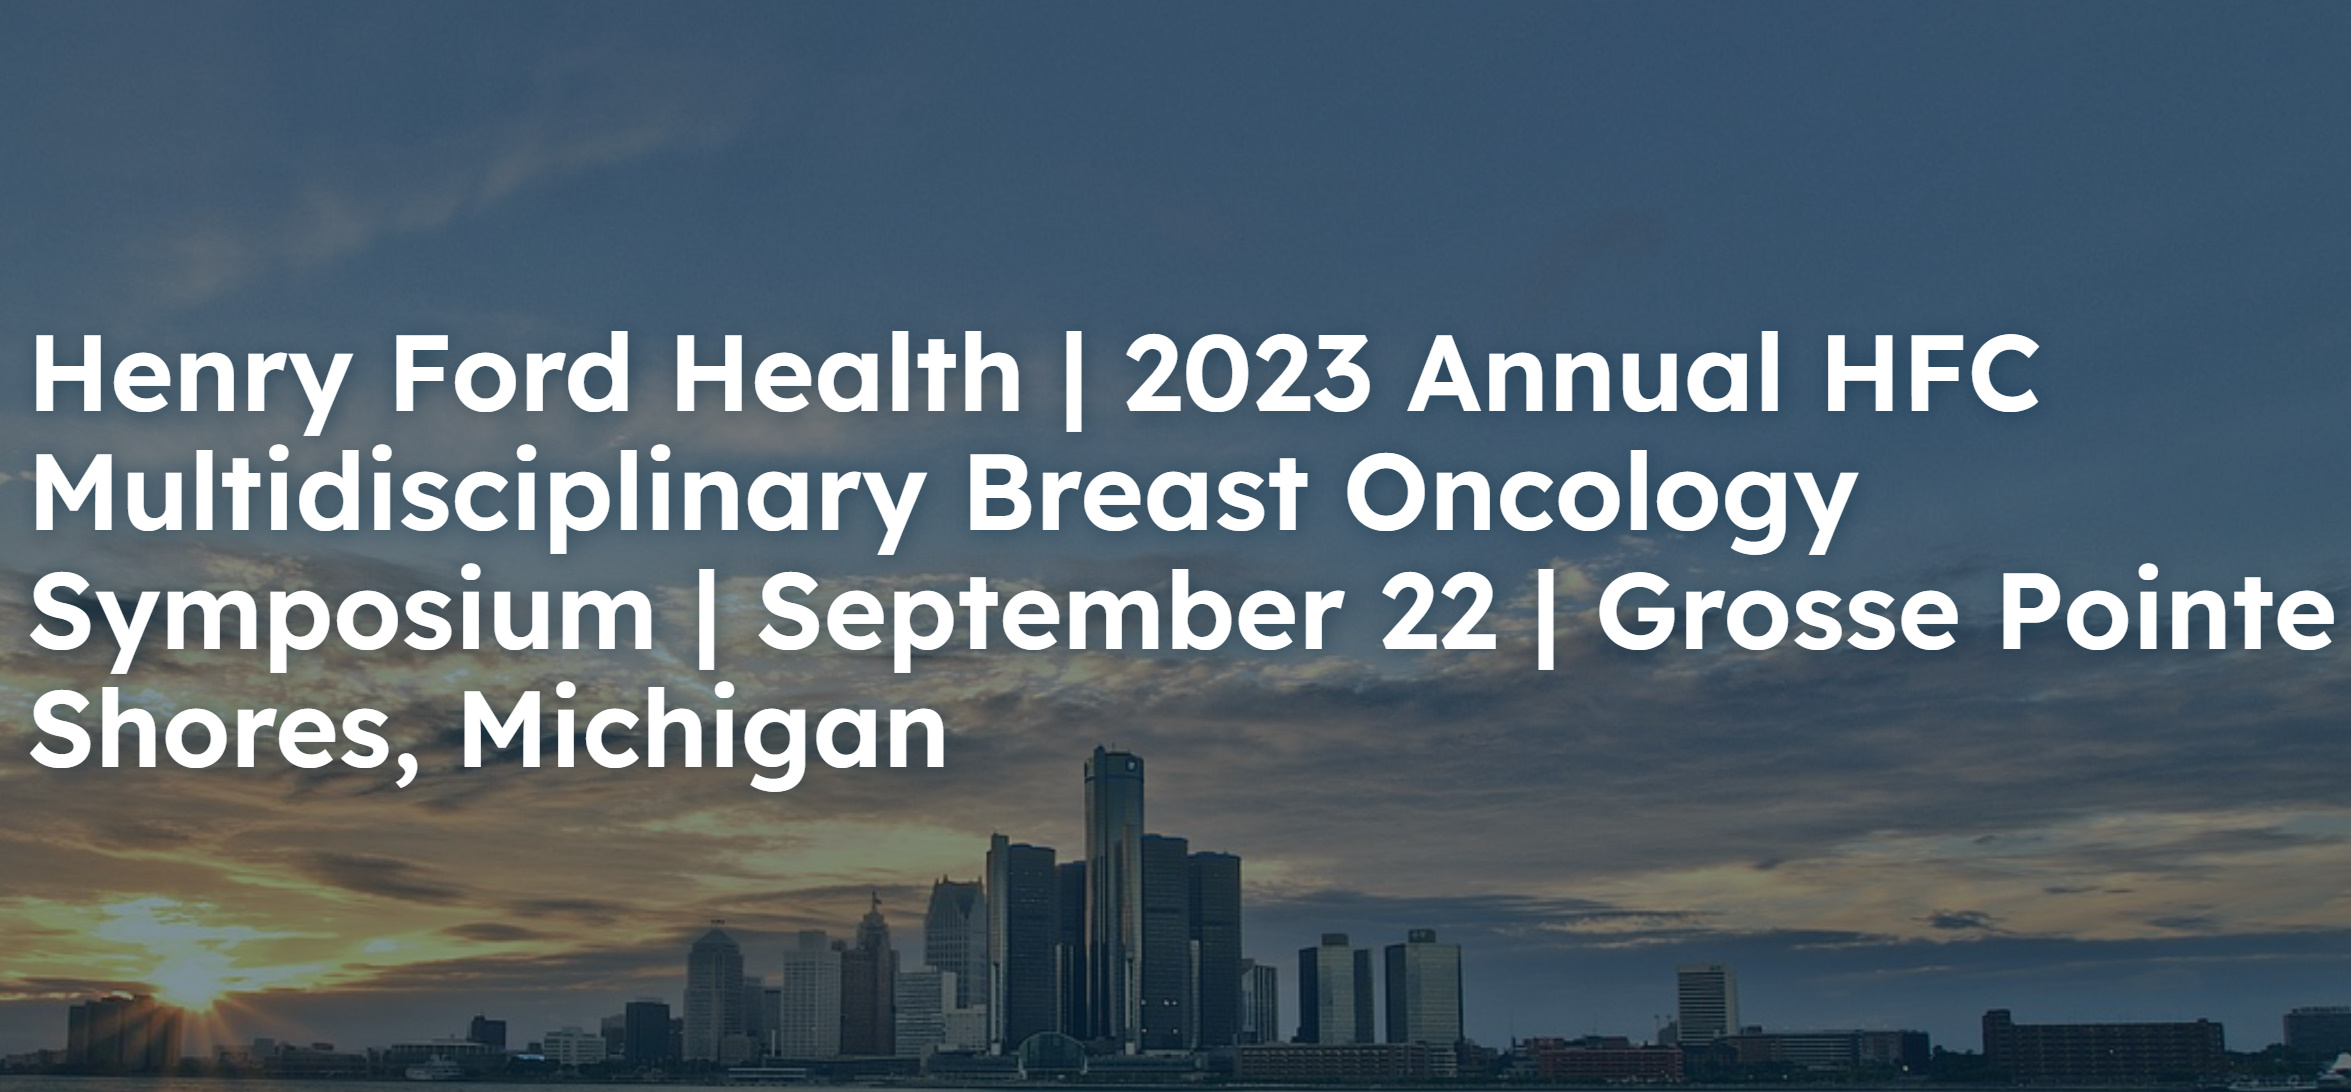 Henry Ford Health 6th Multidisciplinary Breast Oncology Symposium 2023